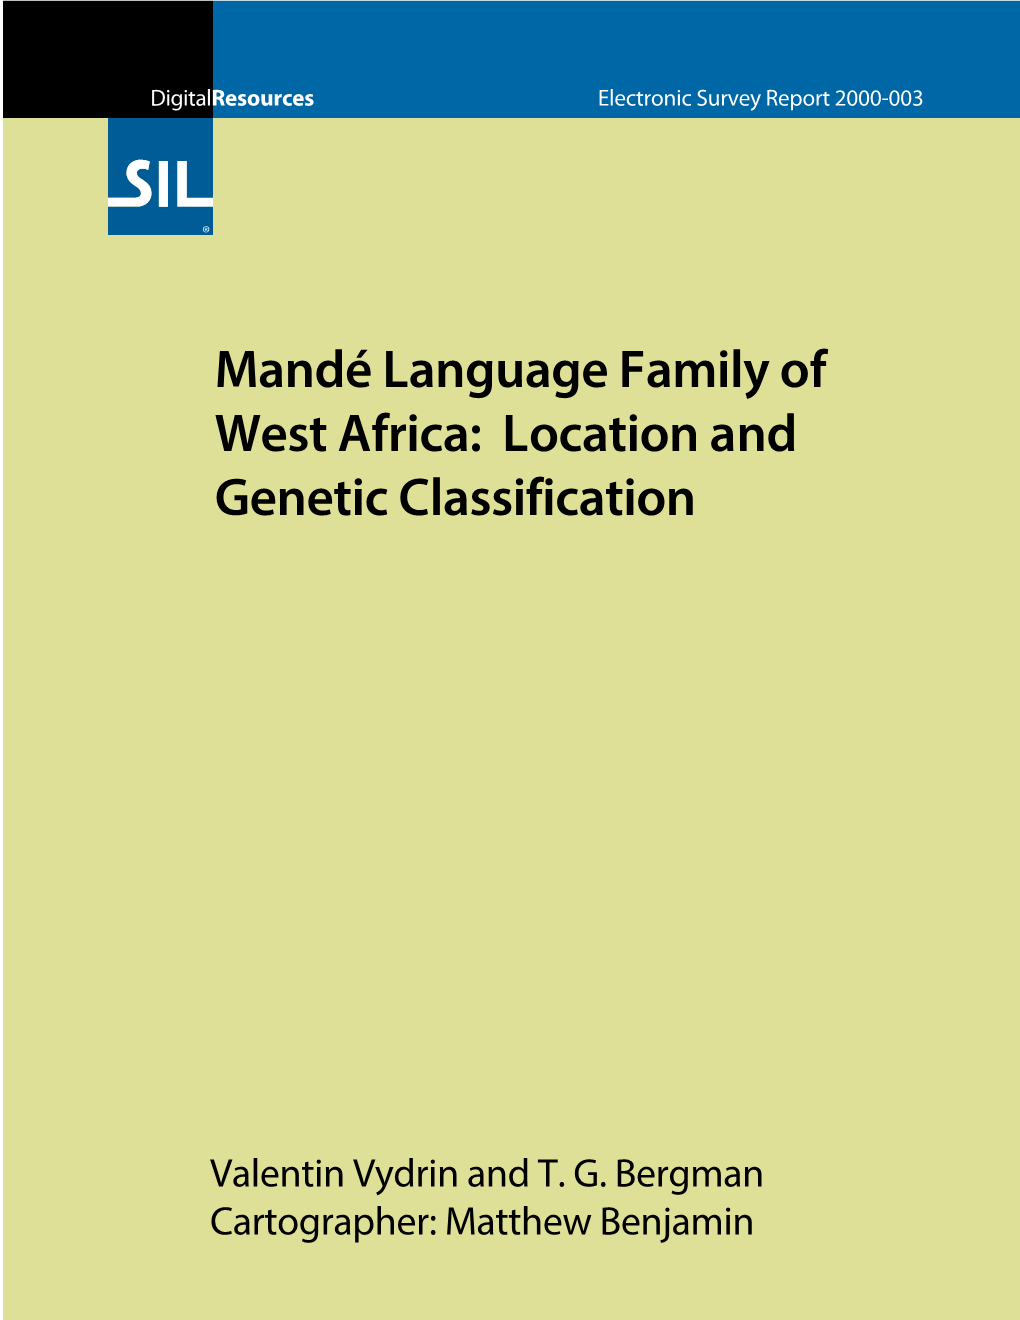 Mandé Language Family of West Africa: Location and Genetic Classification